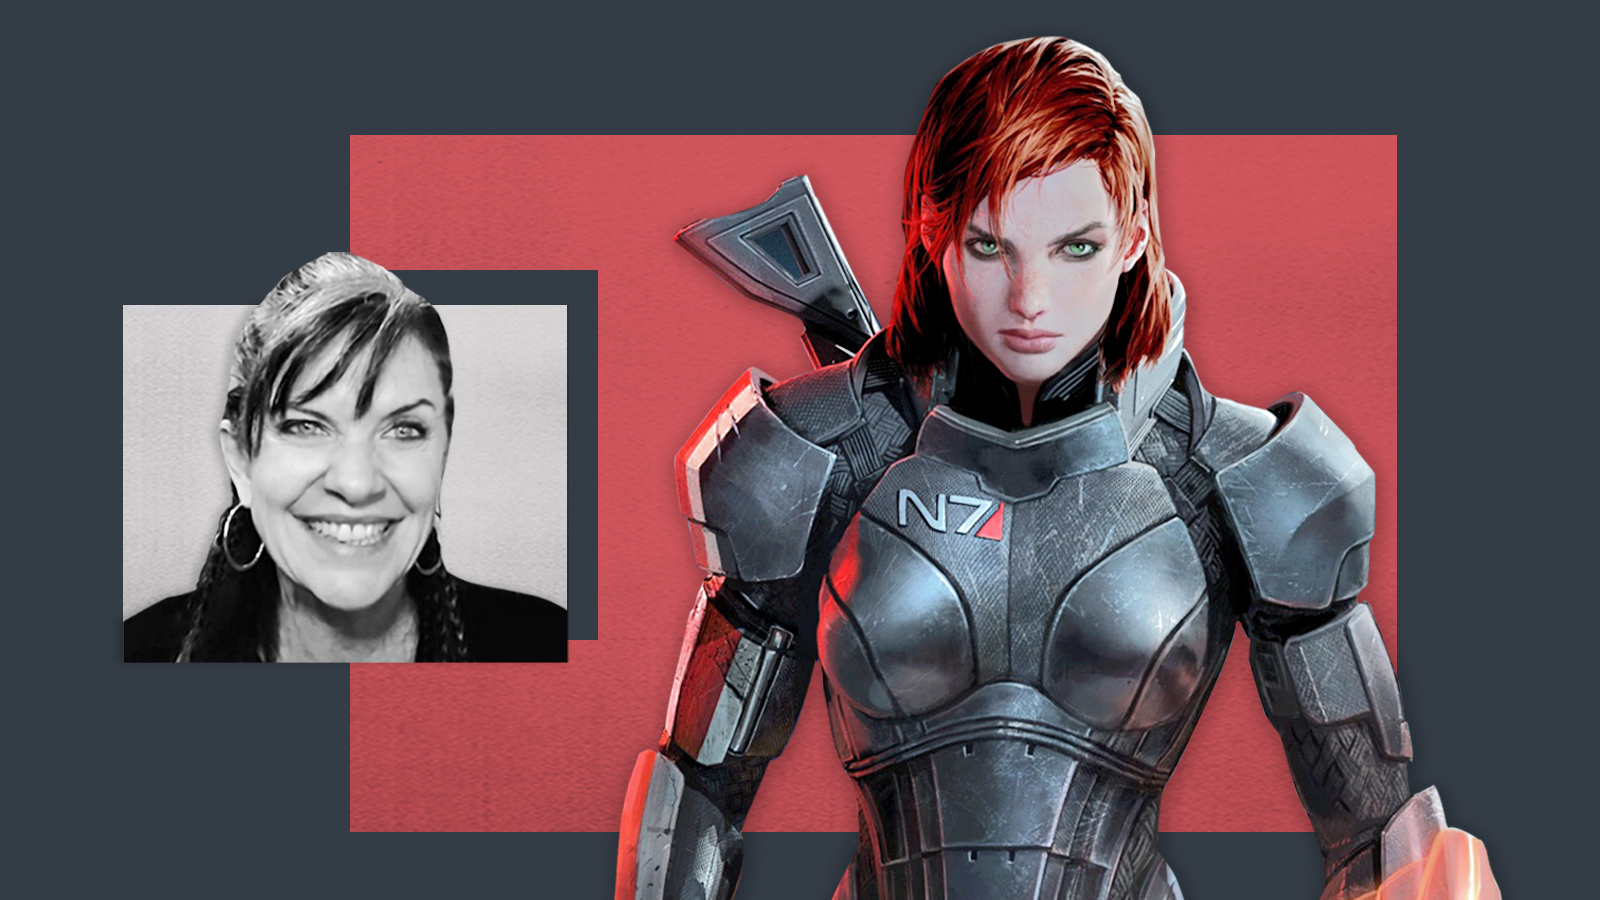 Jennifer Hale Talks Mass Effect And The Challenges Of Voice Acting During The Pandemic